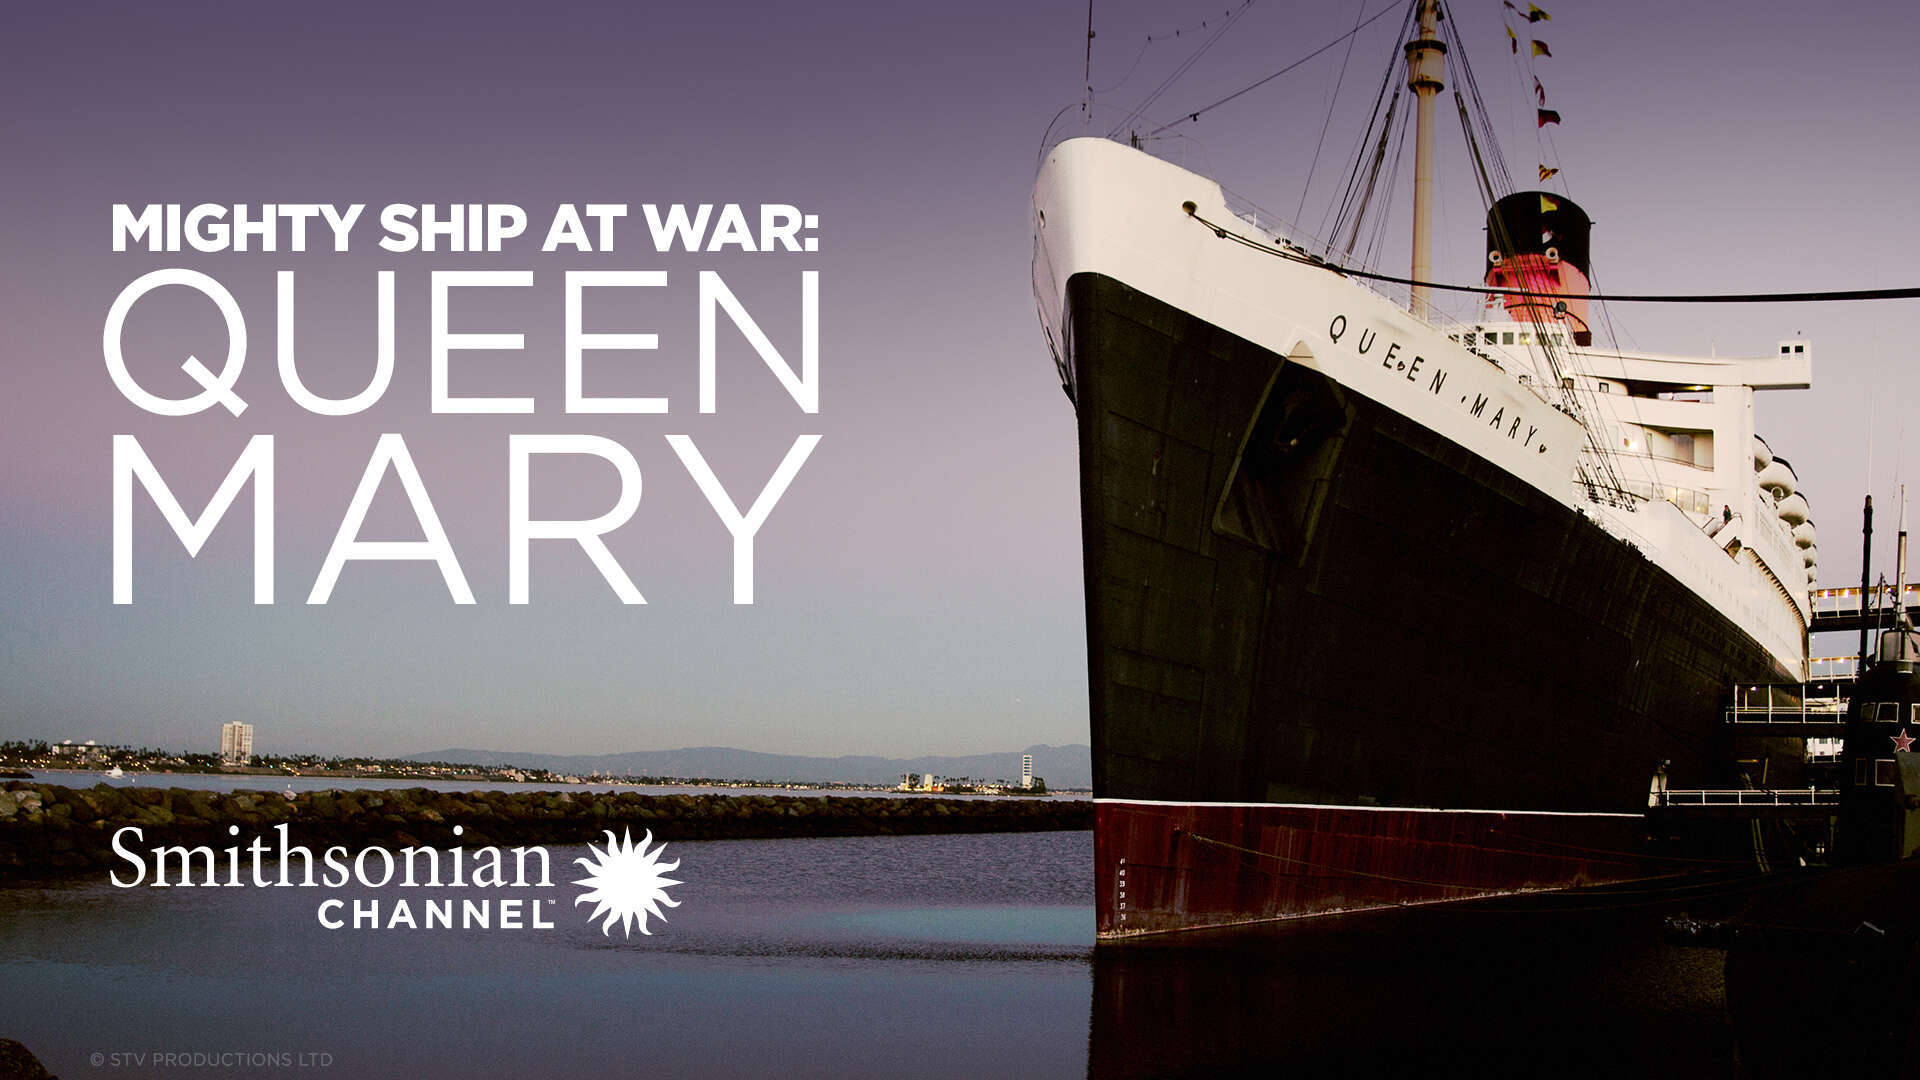 Mighty Ship at War Queen Mary Watch Movie on Paramount Plus